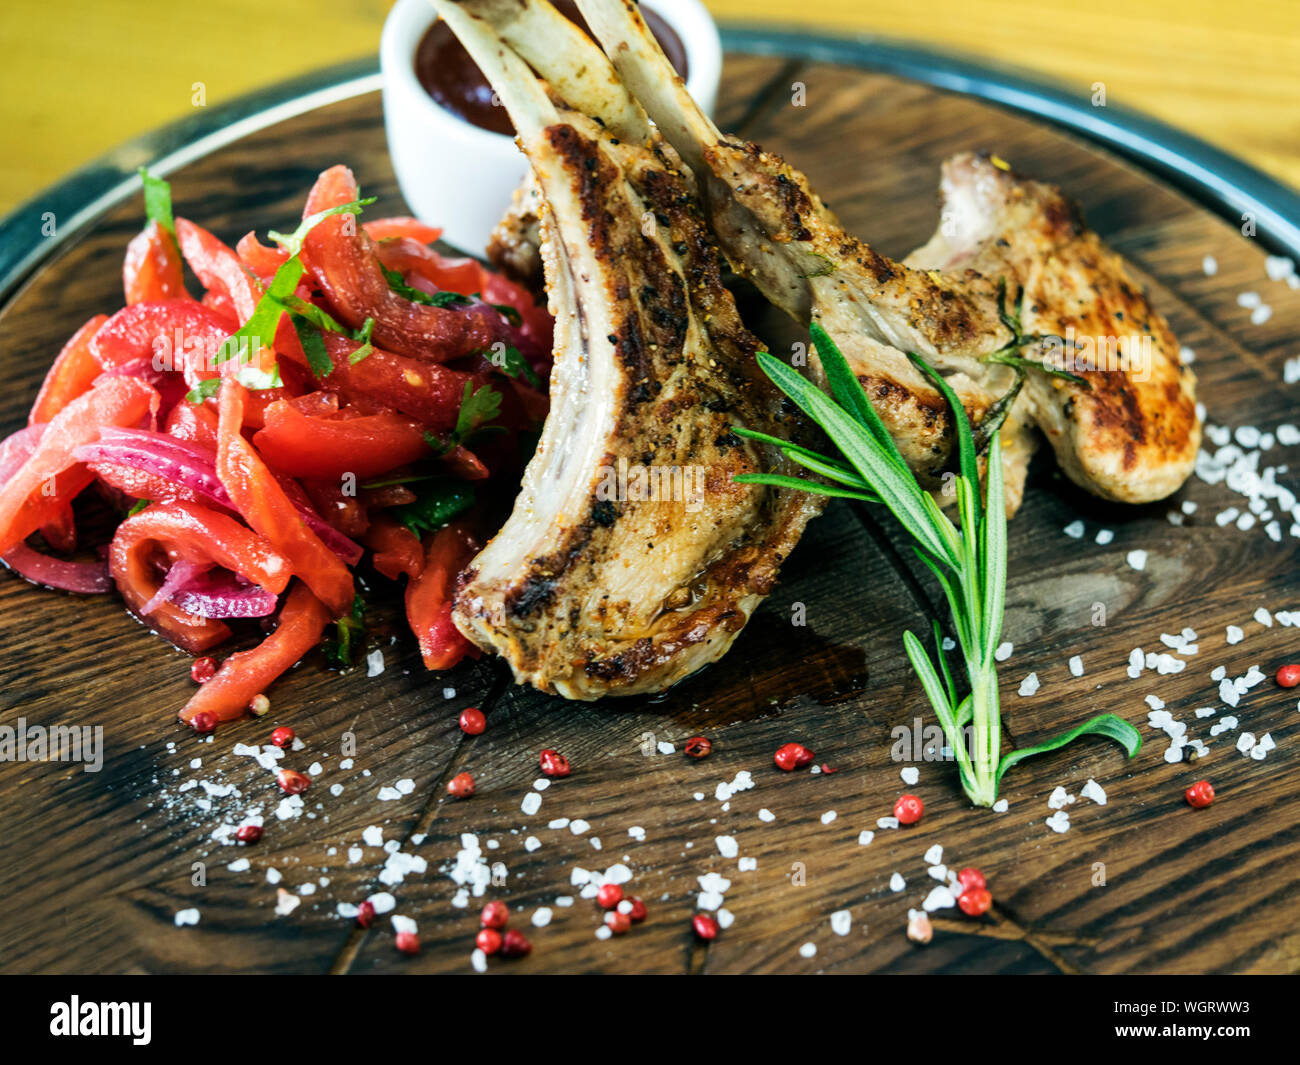 Close-up Of Lamb Chop With Rosemary On Cutting Board Stock Photo